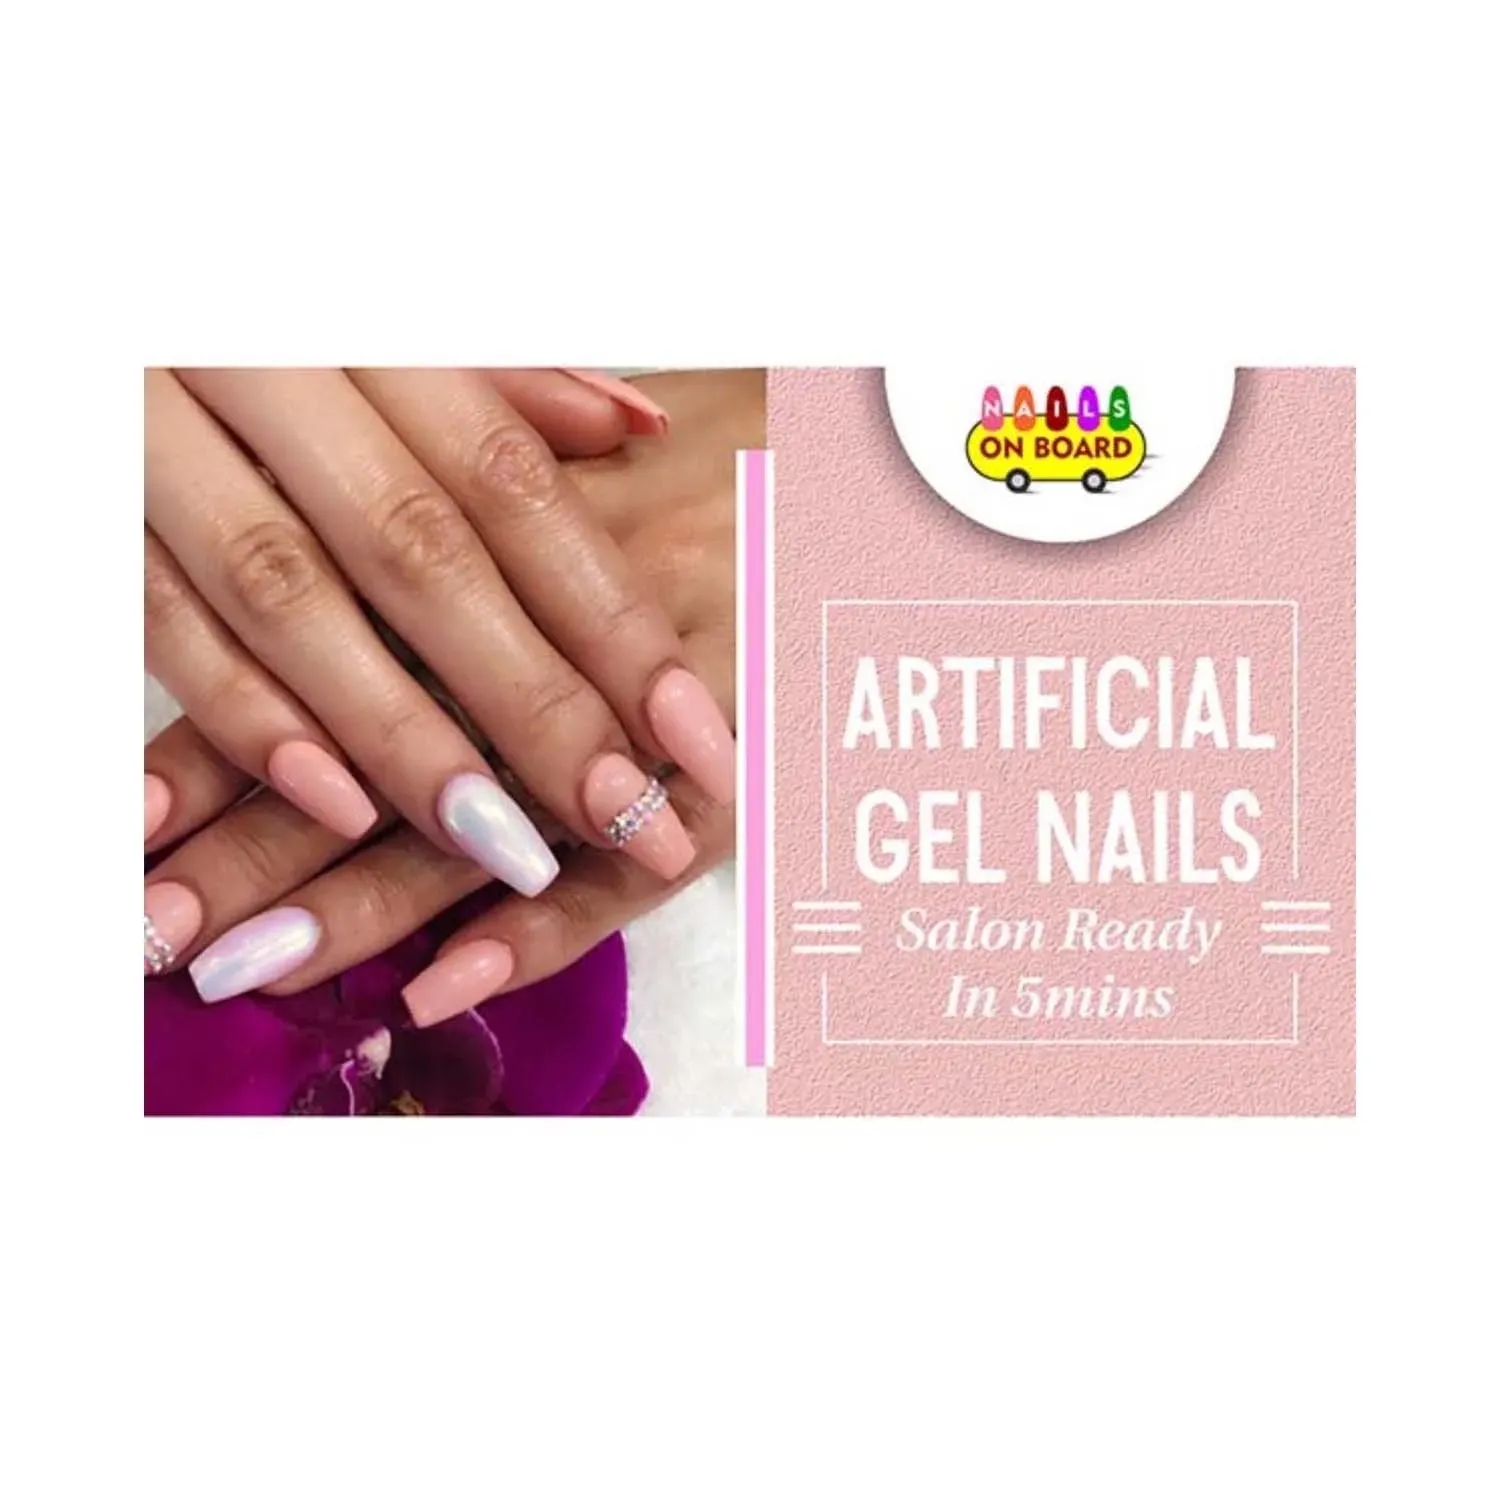 Nails On Board | Nails On Board Handmade Holographic Press On Gel Nails - Pink Nude (X Small)